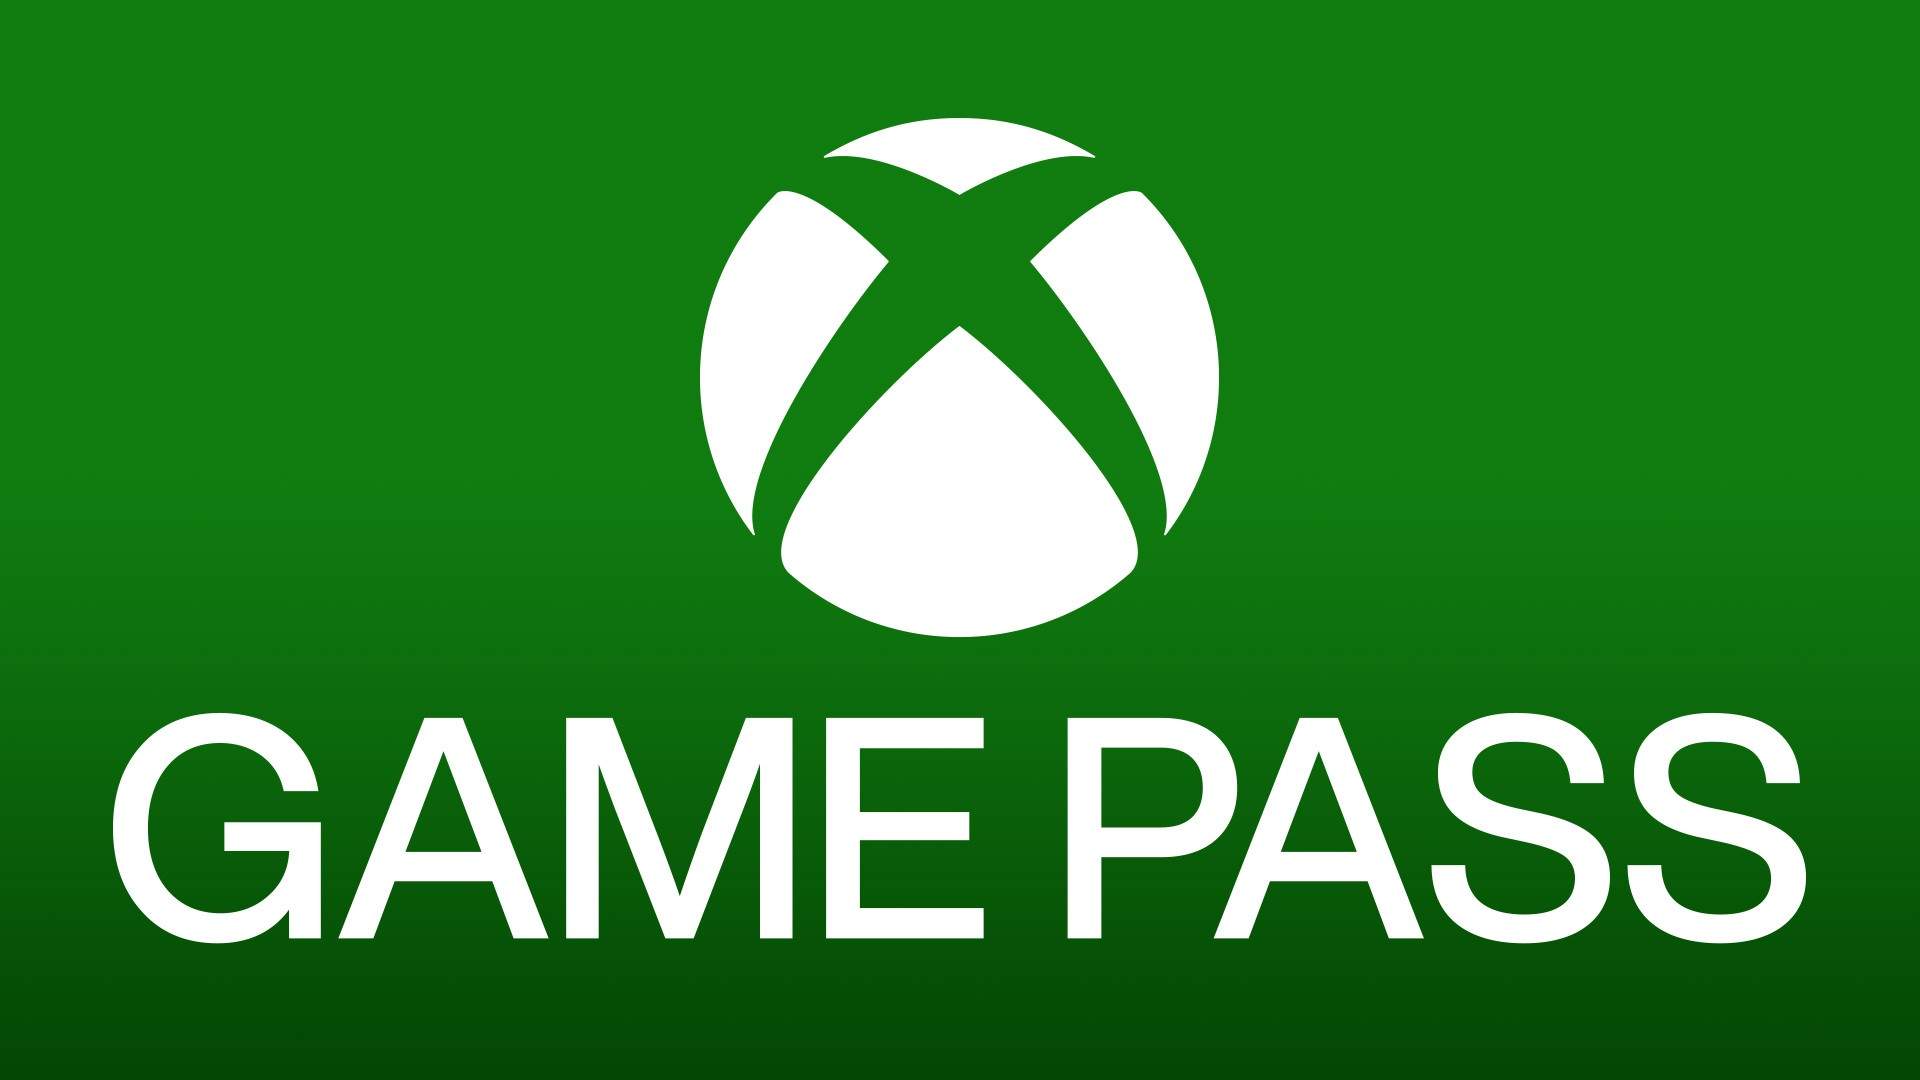 Xbox Game Pass and EA Play - Unlinking GP_LogoGreen-Gradient.jpg